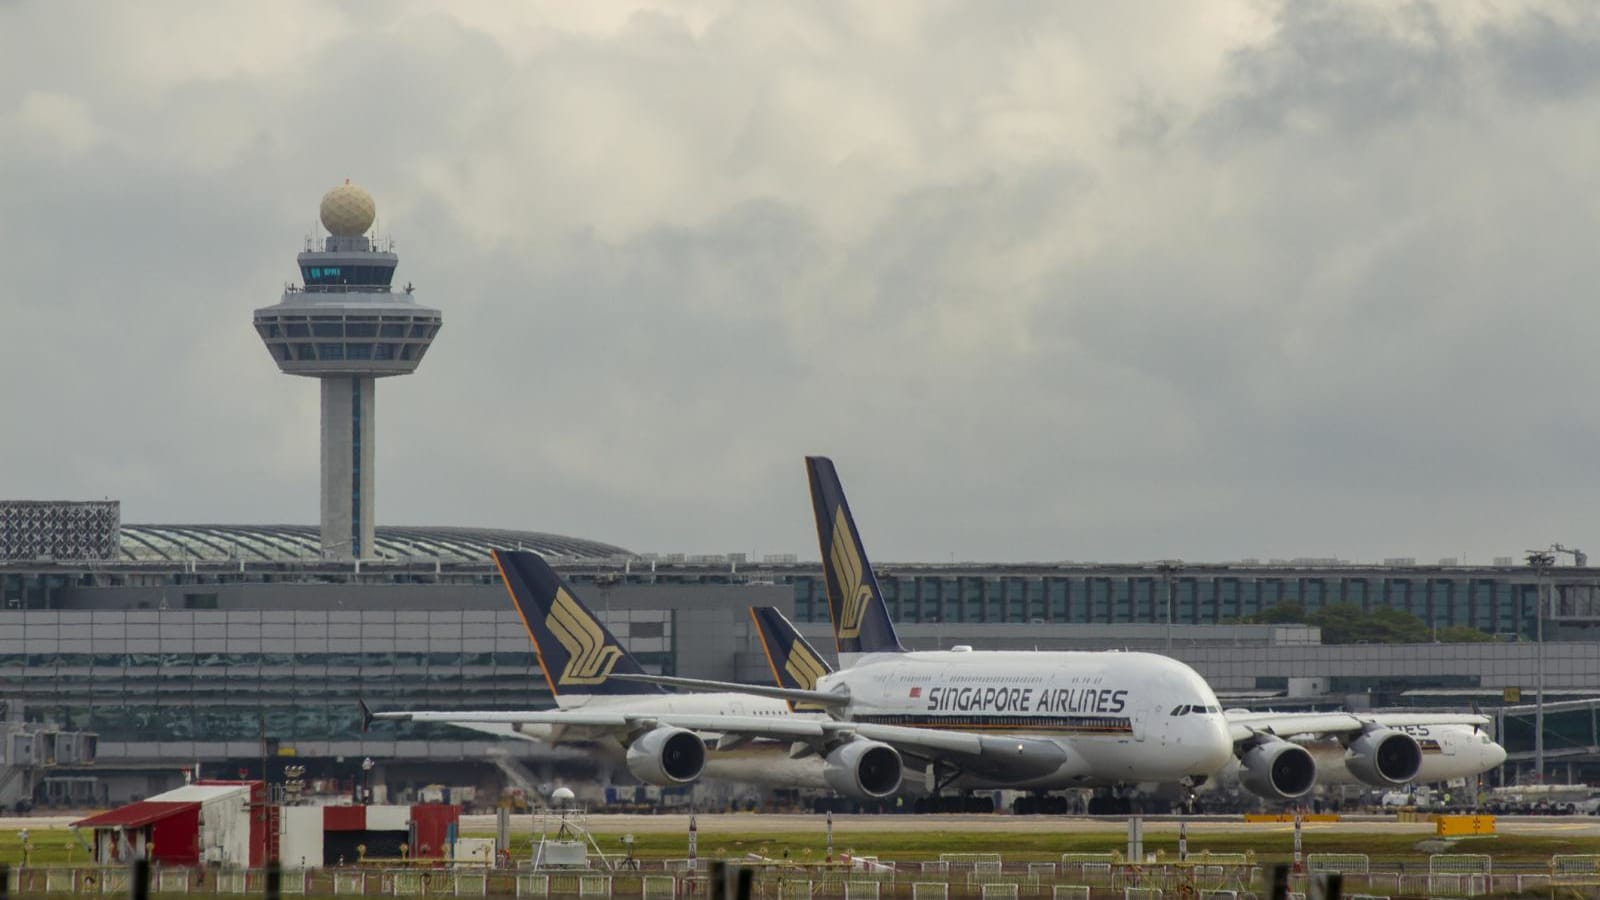 Commentary: Why impose a sustainable aviation fuel levy on passengers flying from Singapore?